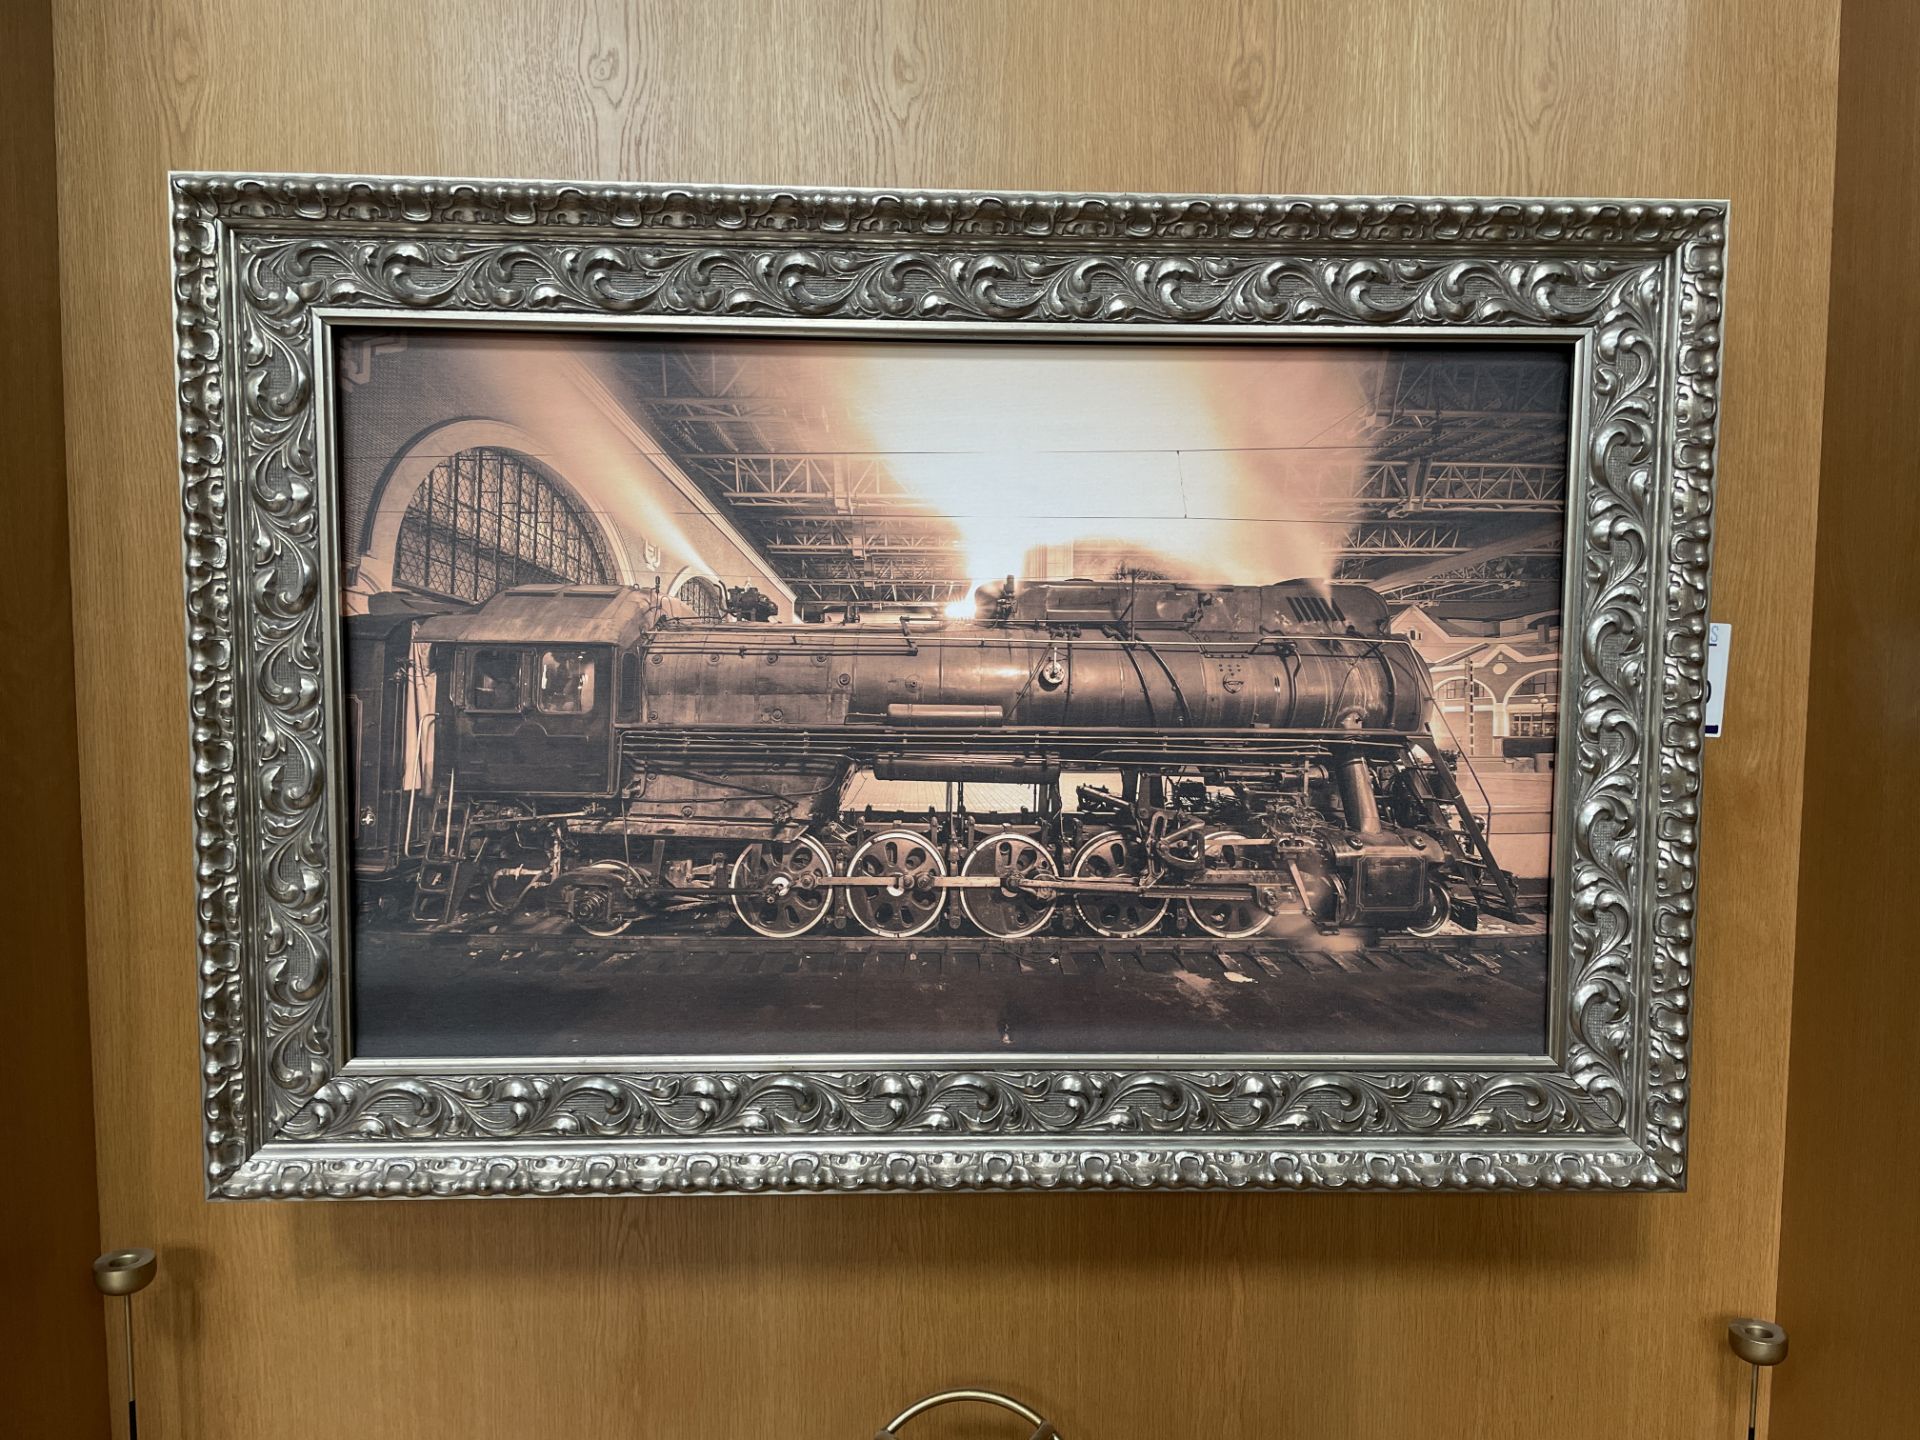 Ornate Framed Locomotive Painted Screen Hiding A TV (Location: High Wycombe. Please Refer to General